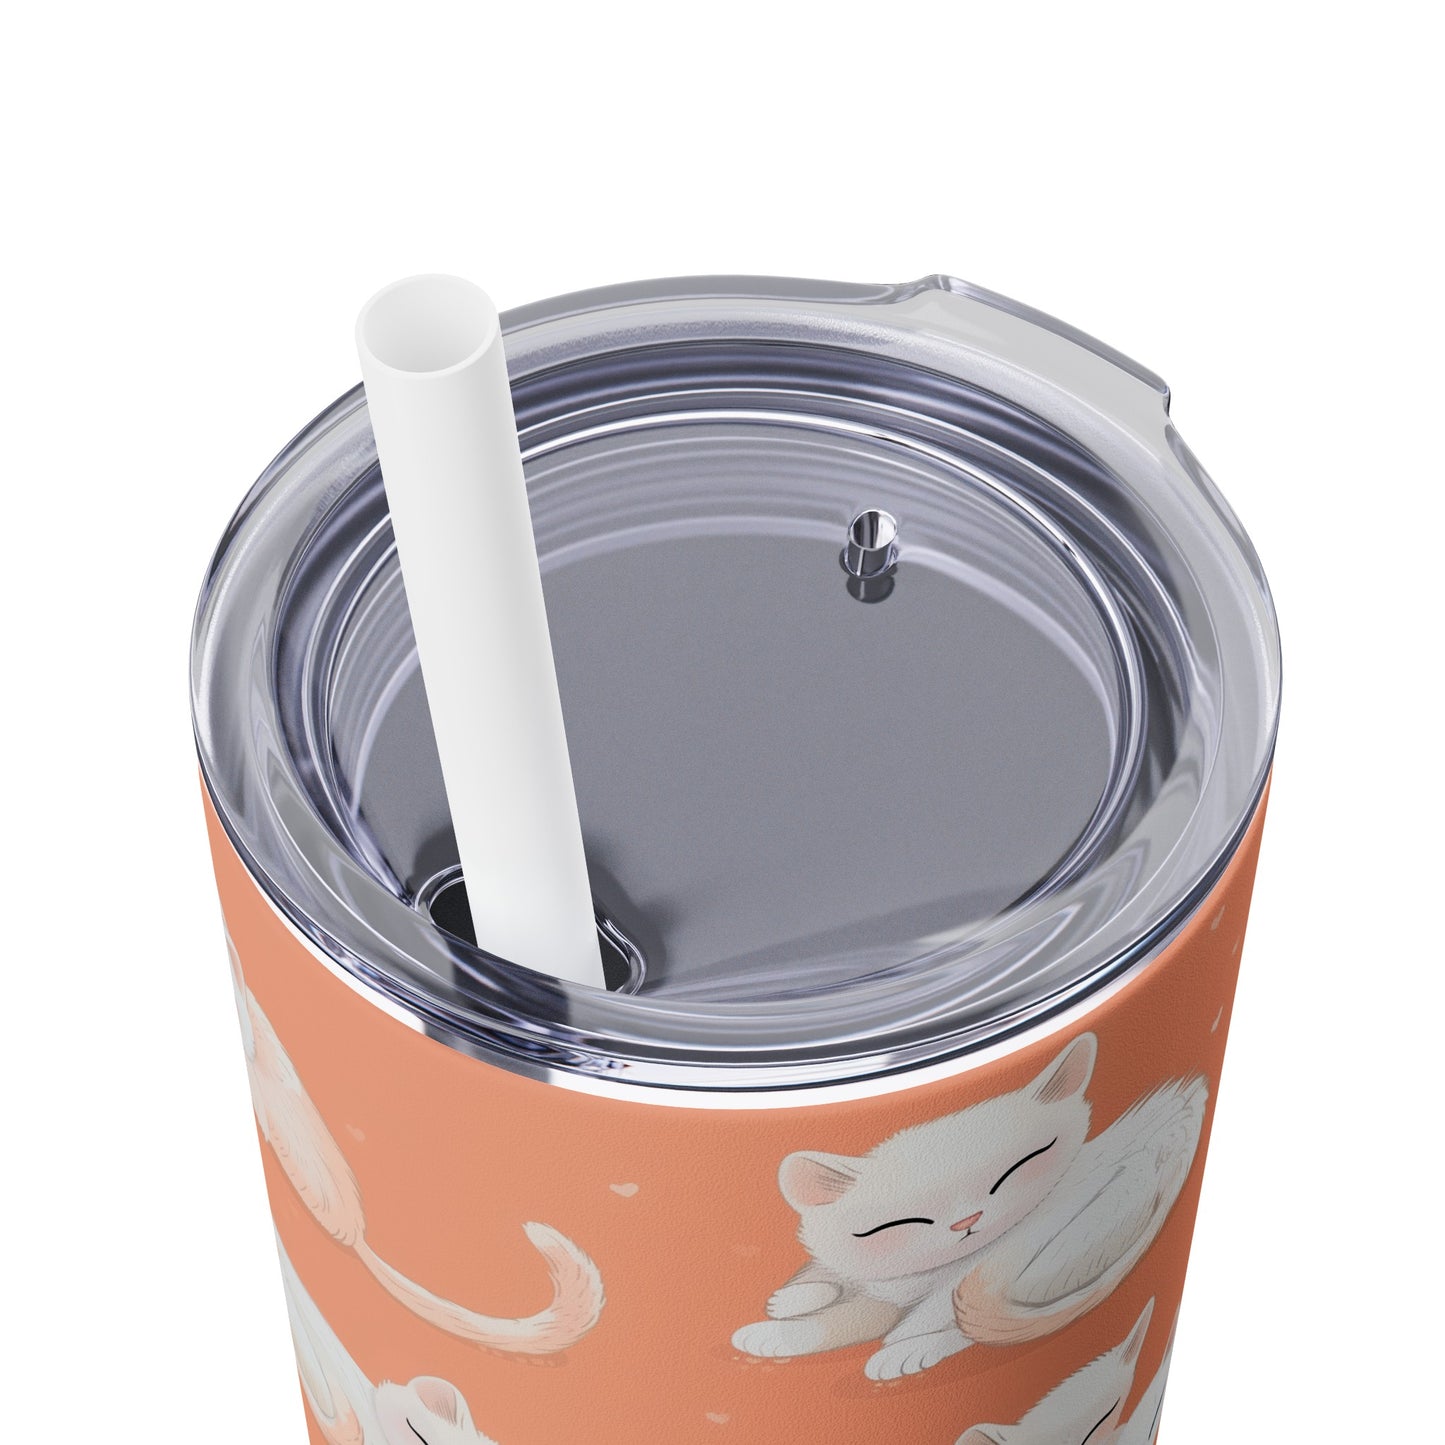 Insulated 20 oz Tumbler with Lid & Straw, Cute Baby Kittens - Double-walled Stainless Steel, Keeps Drinks Hot or Cold